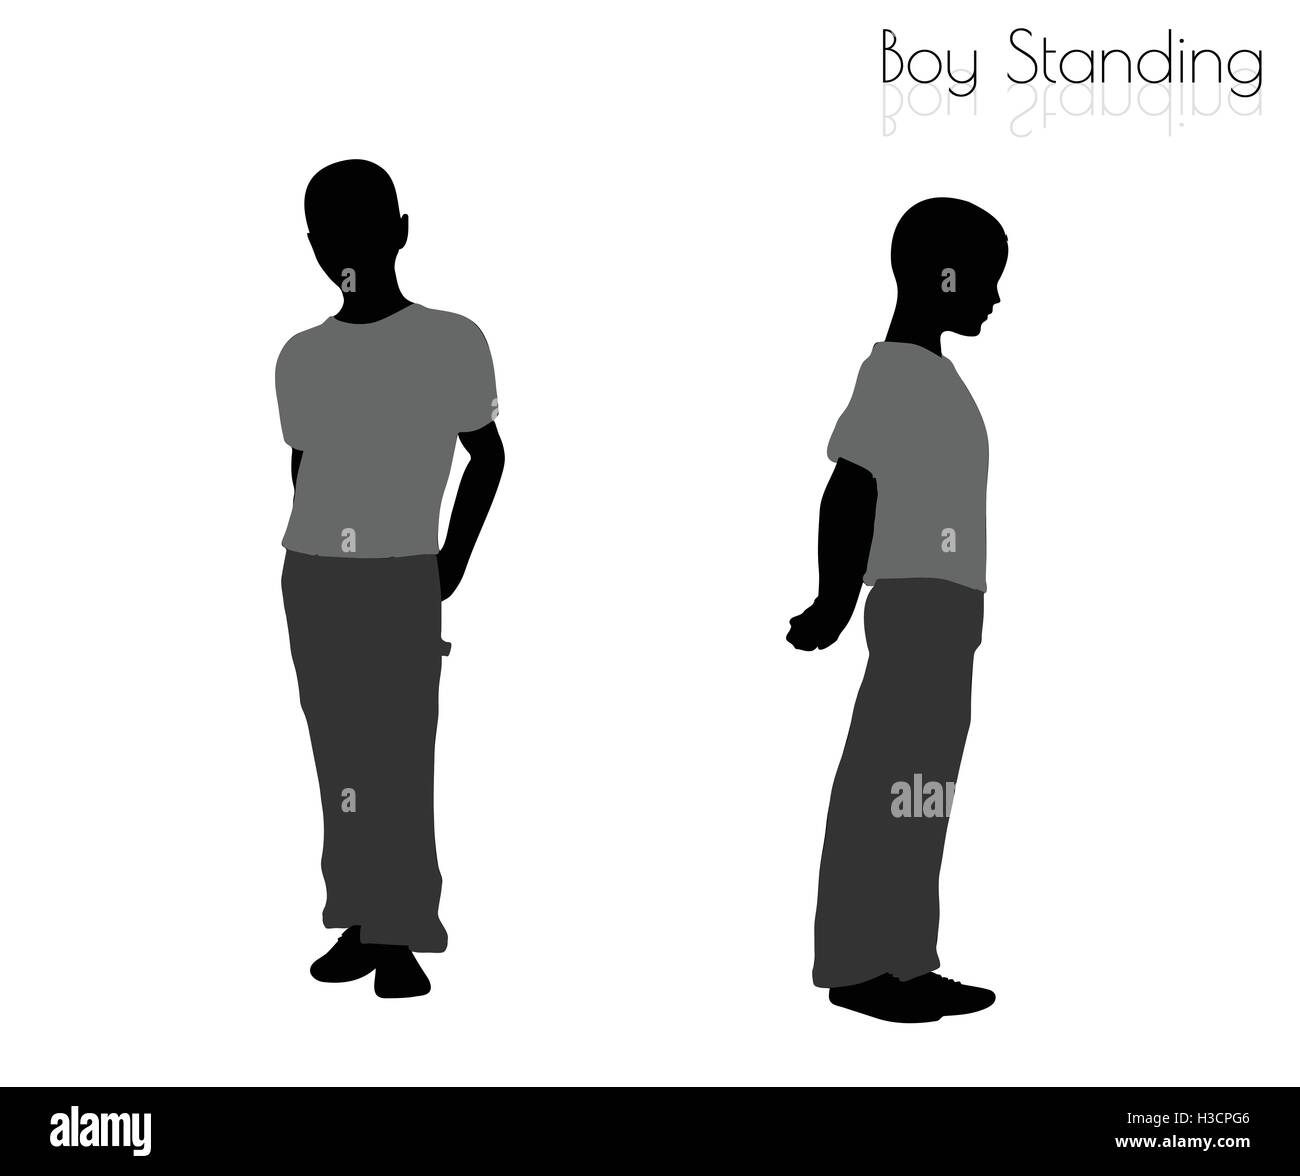 EPS 10 vector illustration of boy in Standing pose on white background Stock Vector